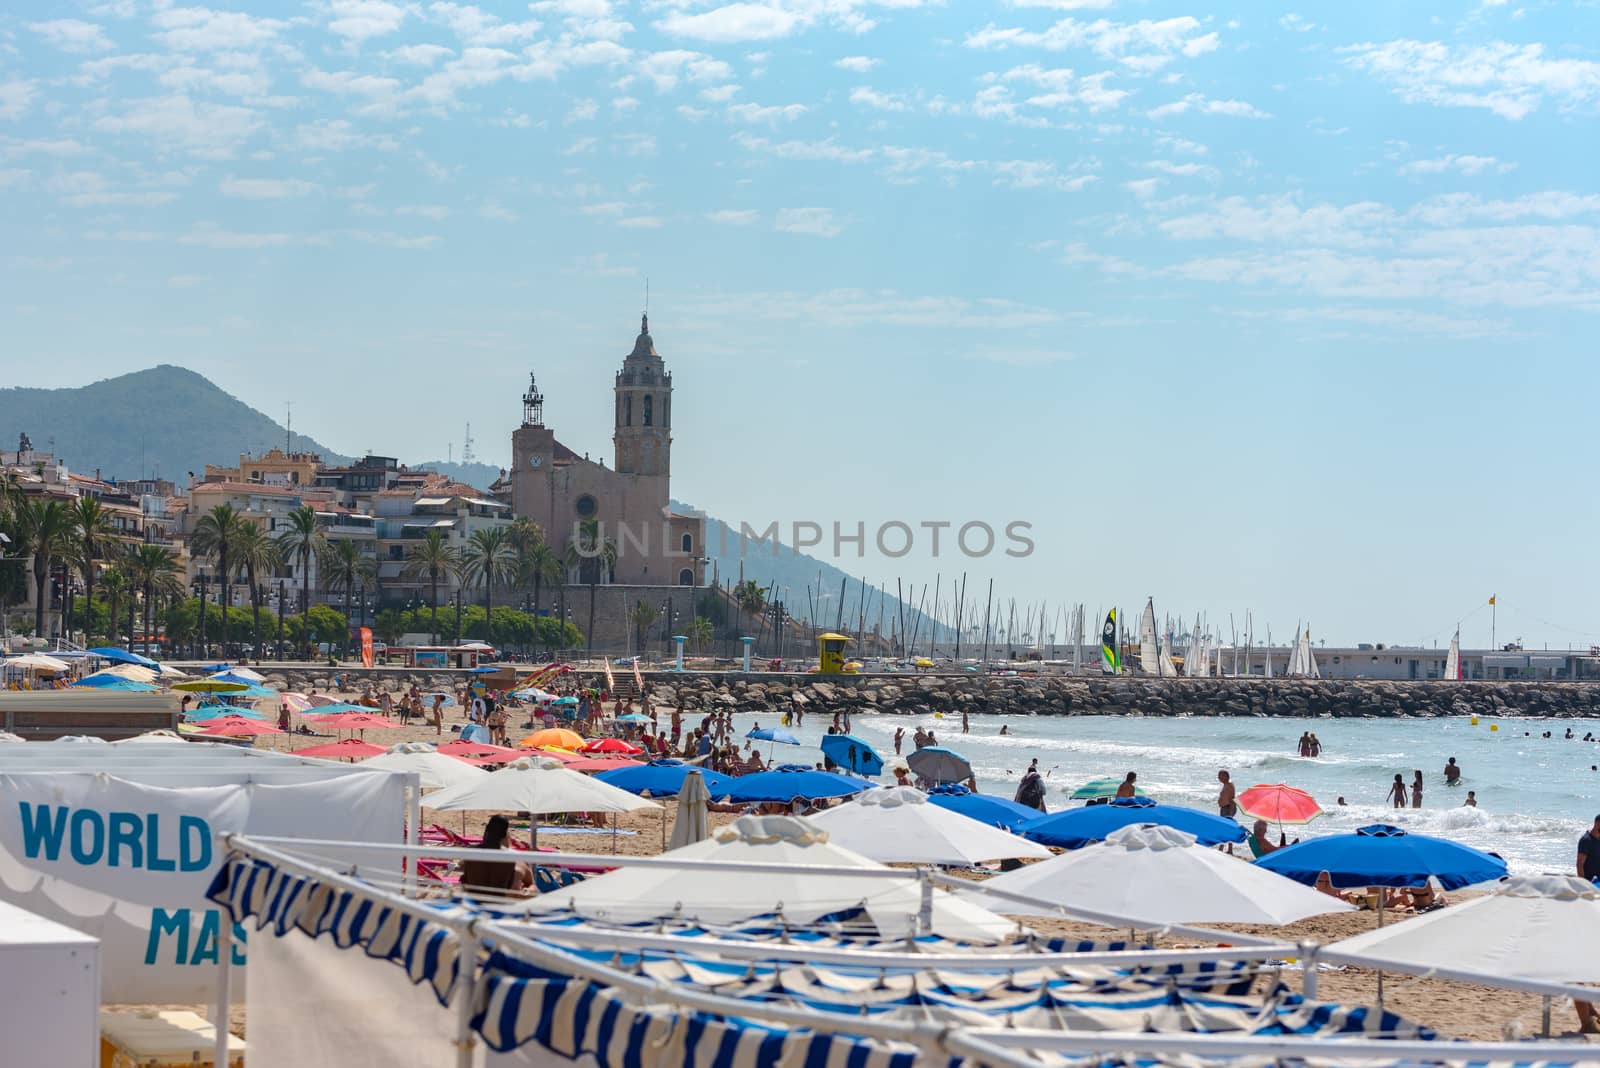 Sitges, Catalonia, Spain: July 28, 2020: People on the Paseo Maritimo in the city of Sitges in the summer of 2020.